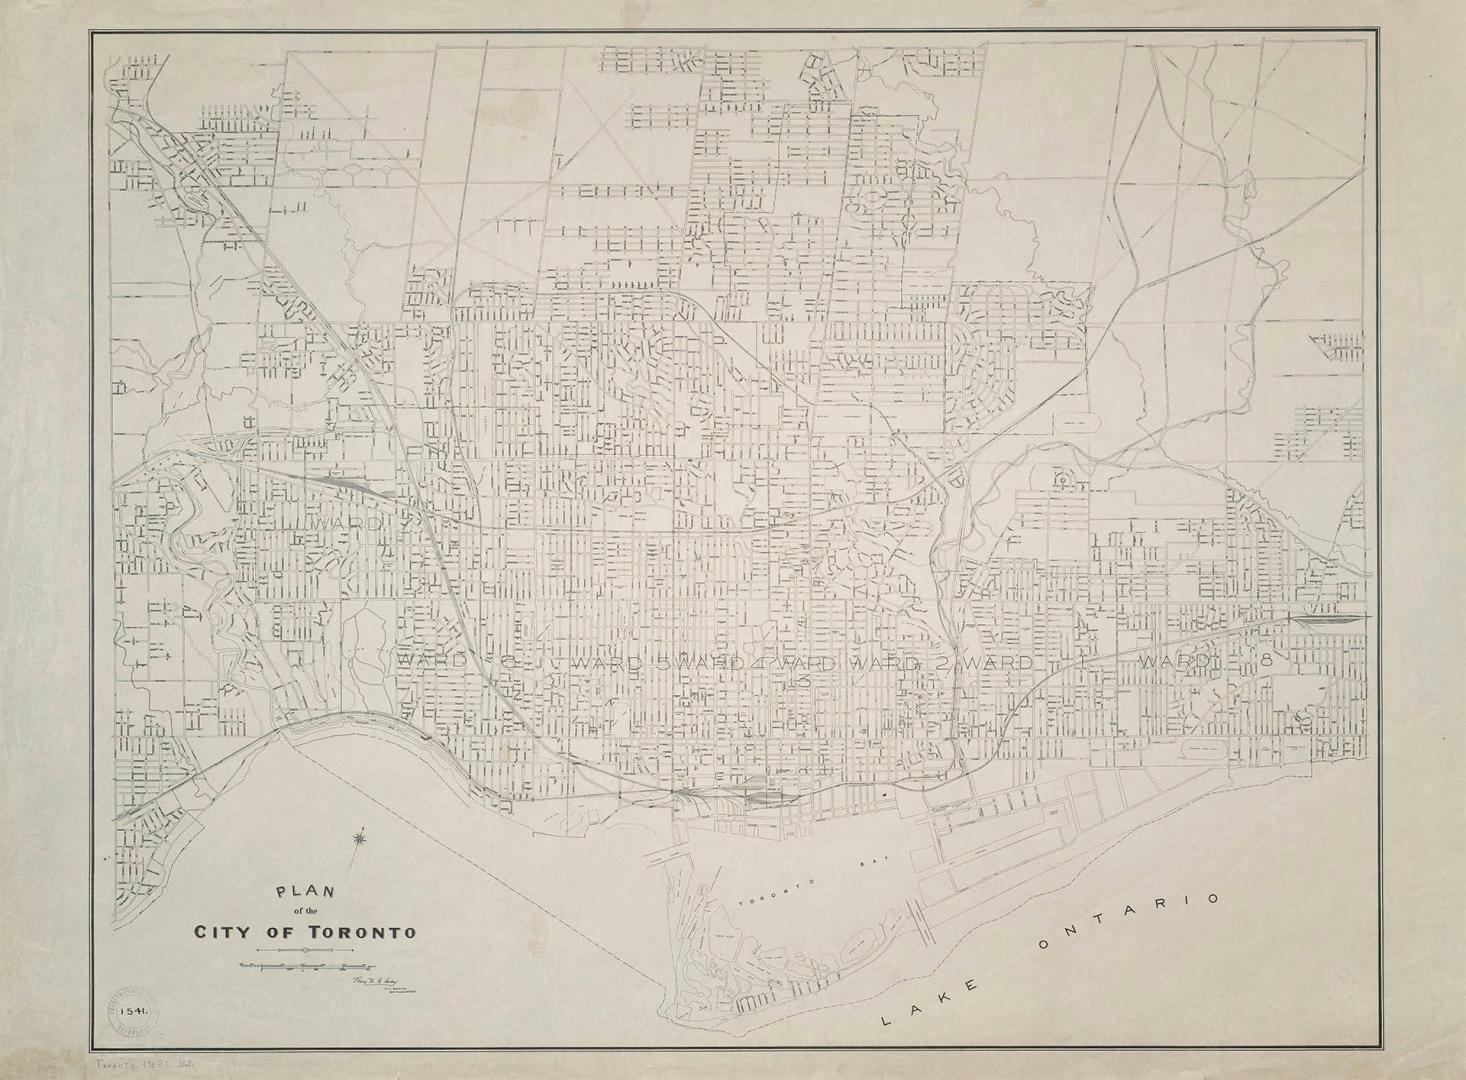 Plan of the City of Toronto, Tracy D